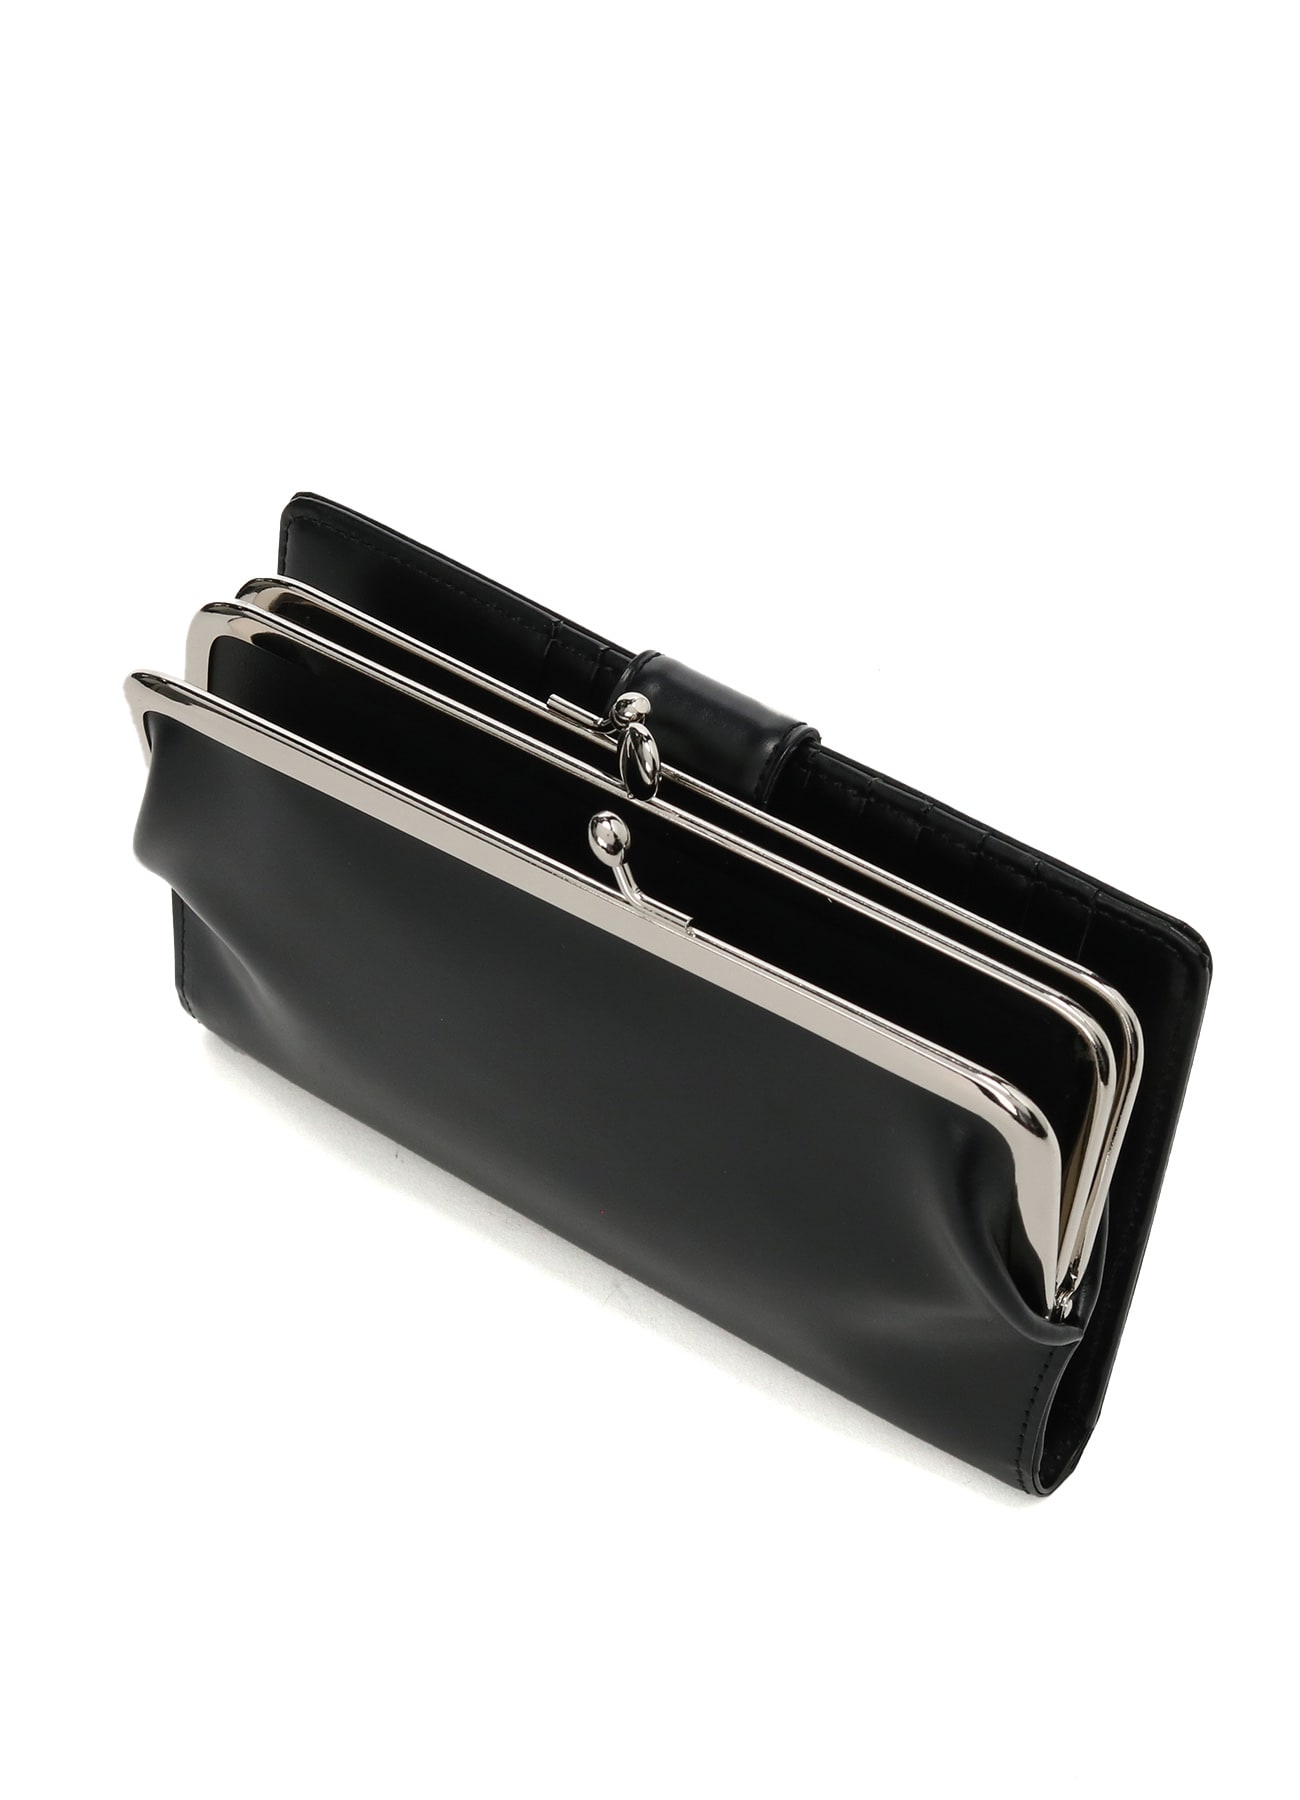 CUIR LEATHER LONG CLASP WALLET